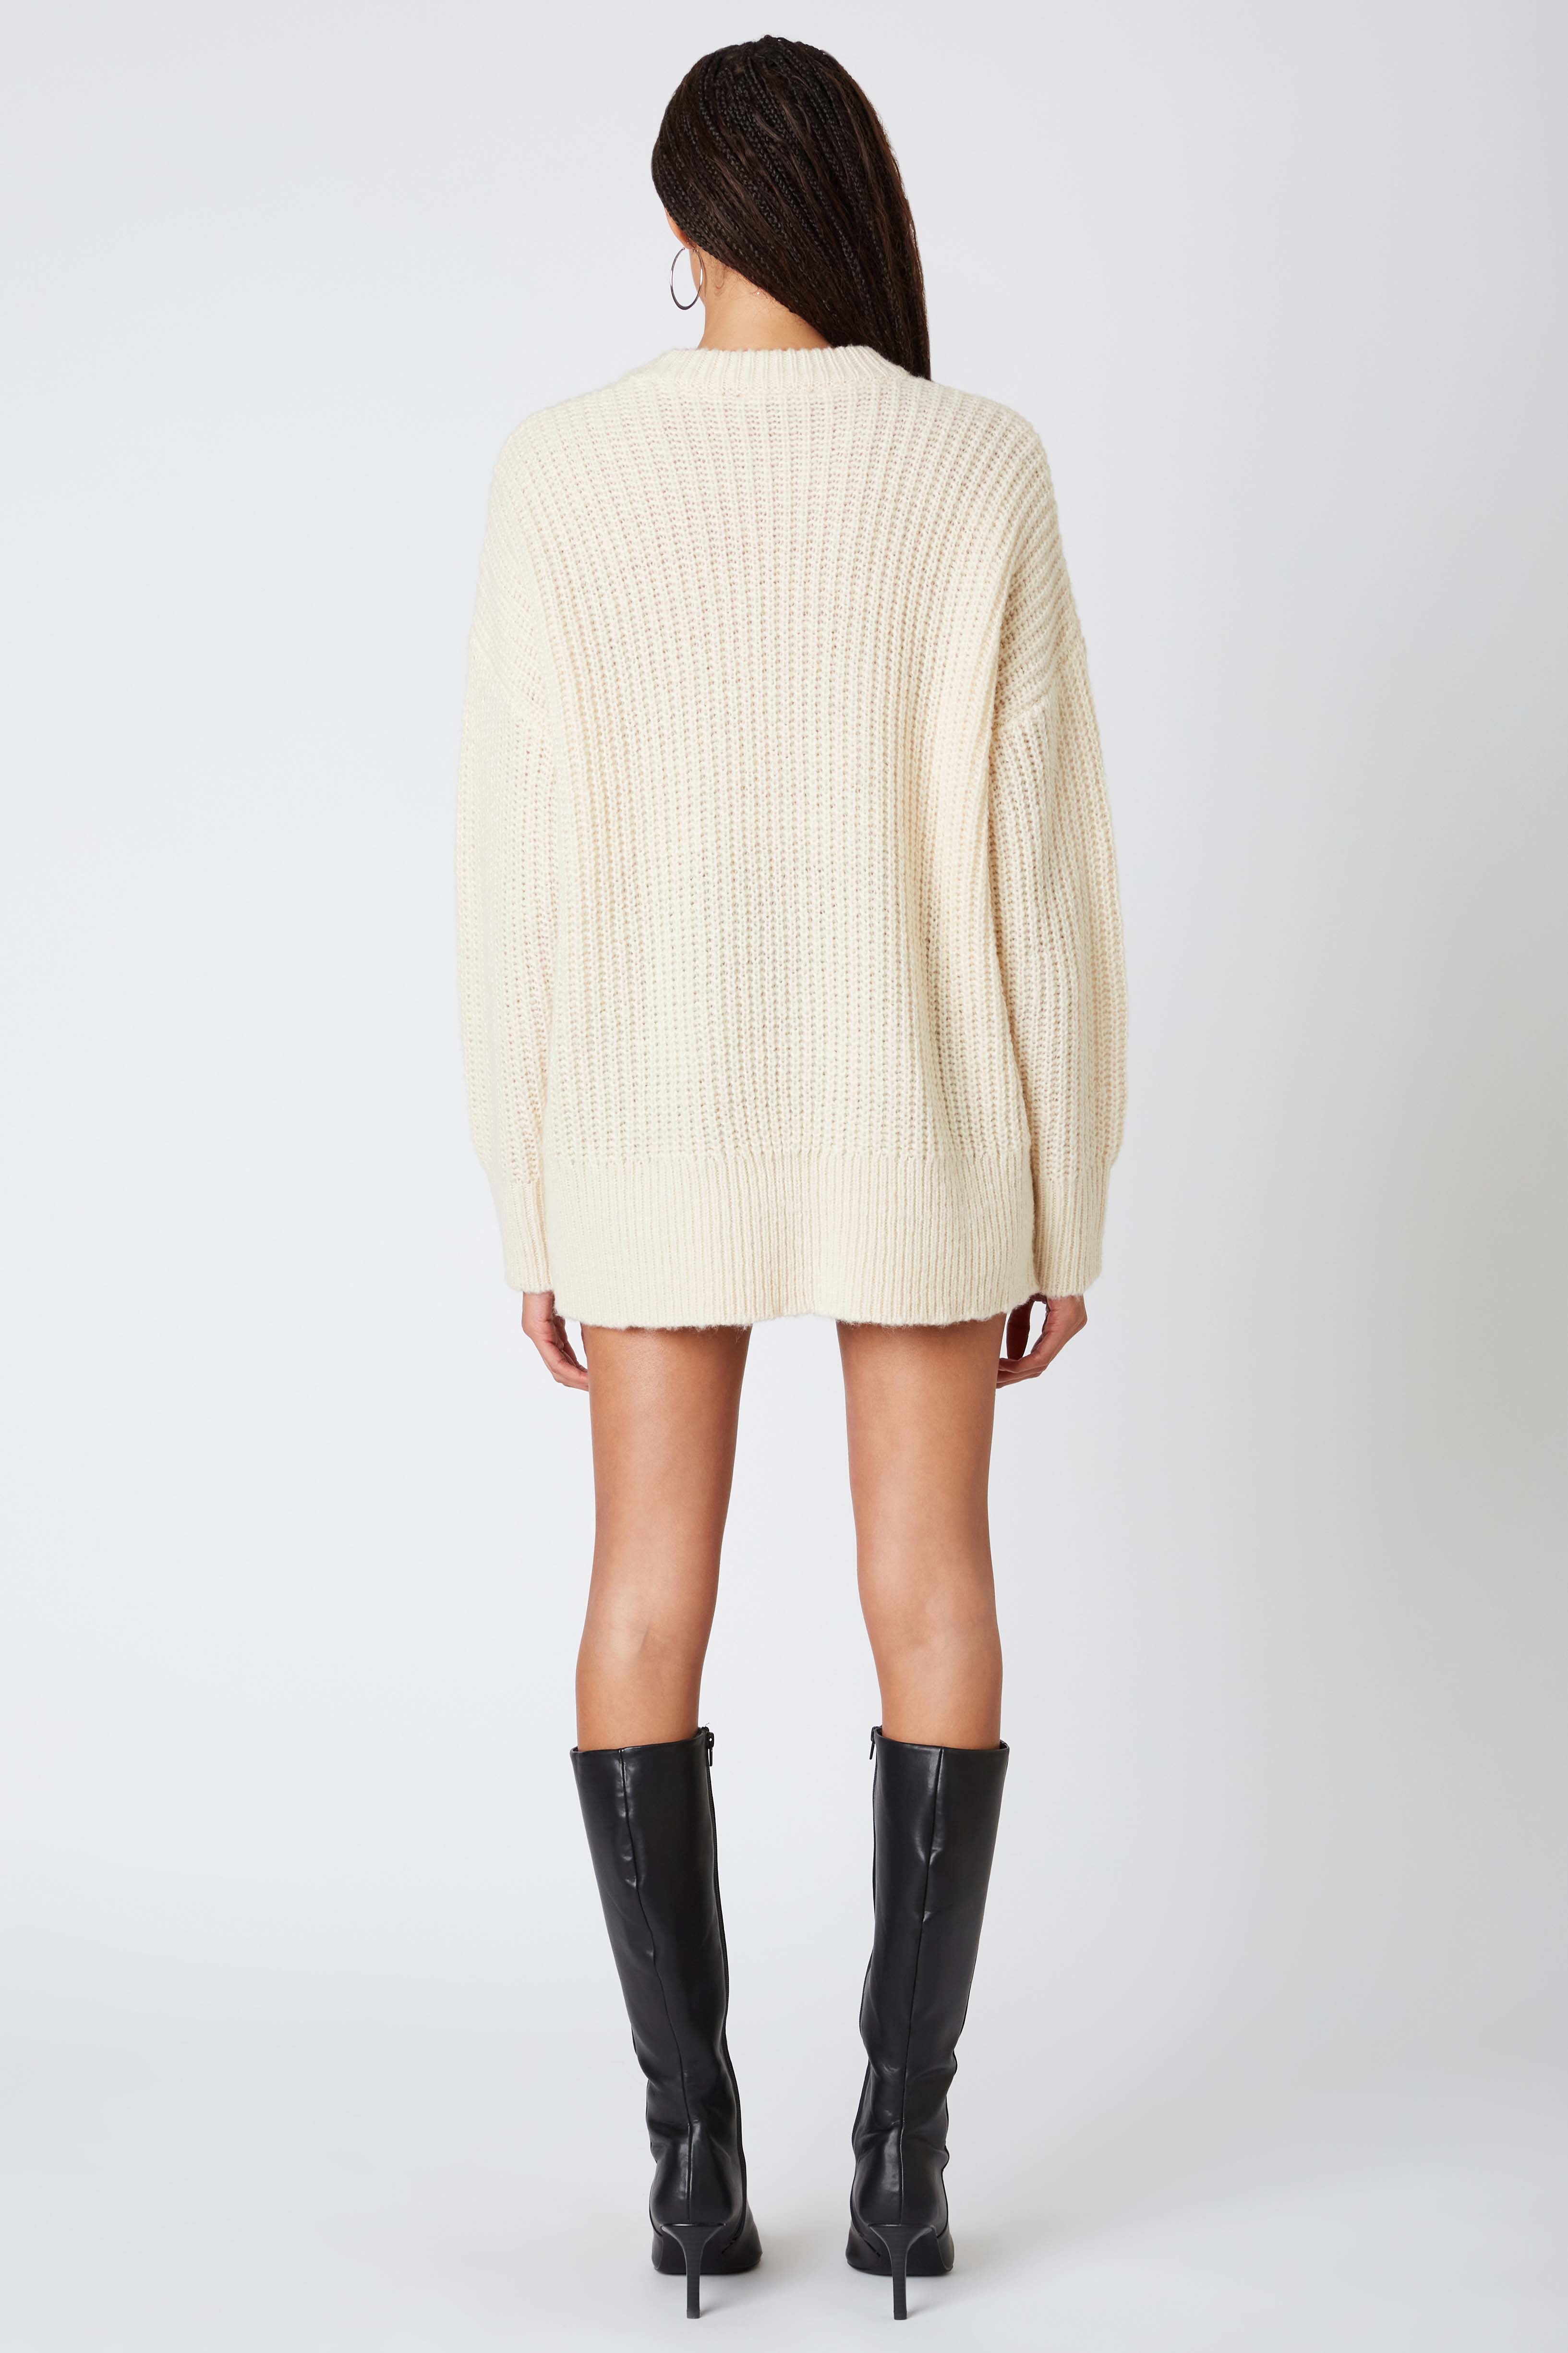 Oversized Knitted Sweater in Ivory Back View